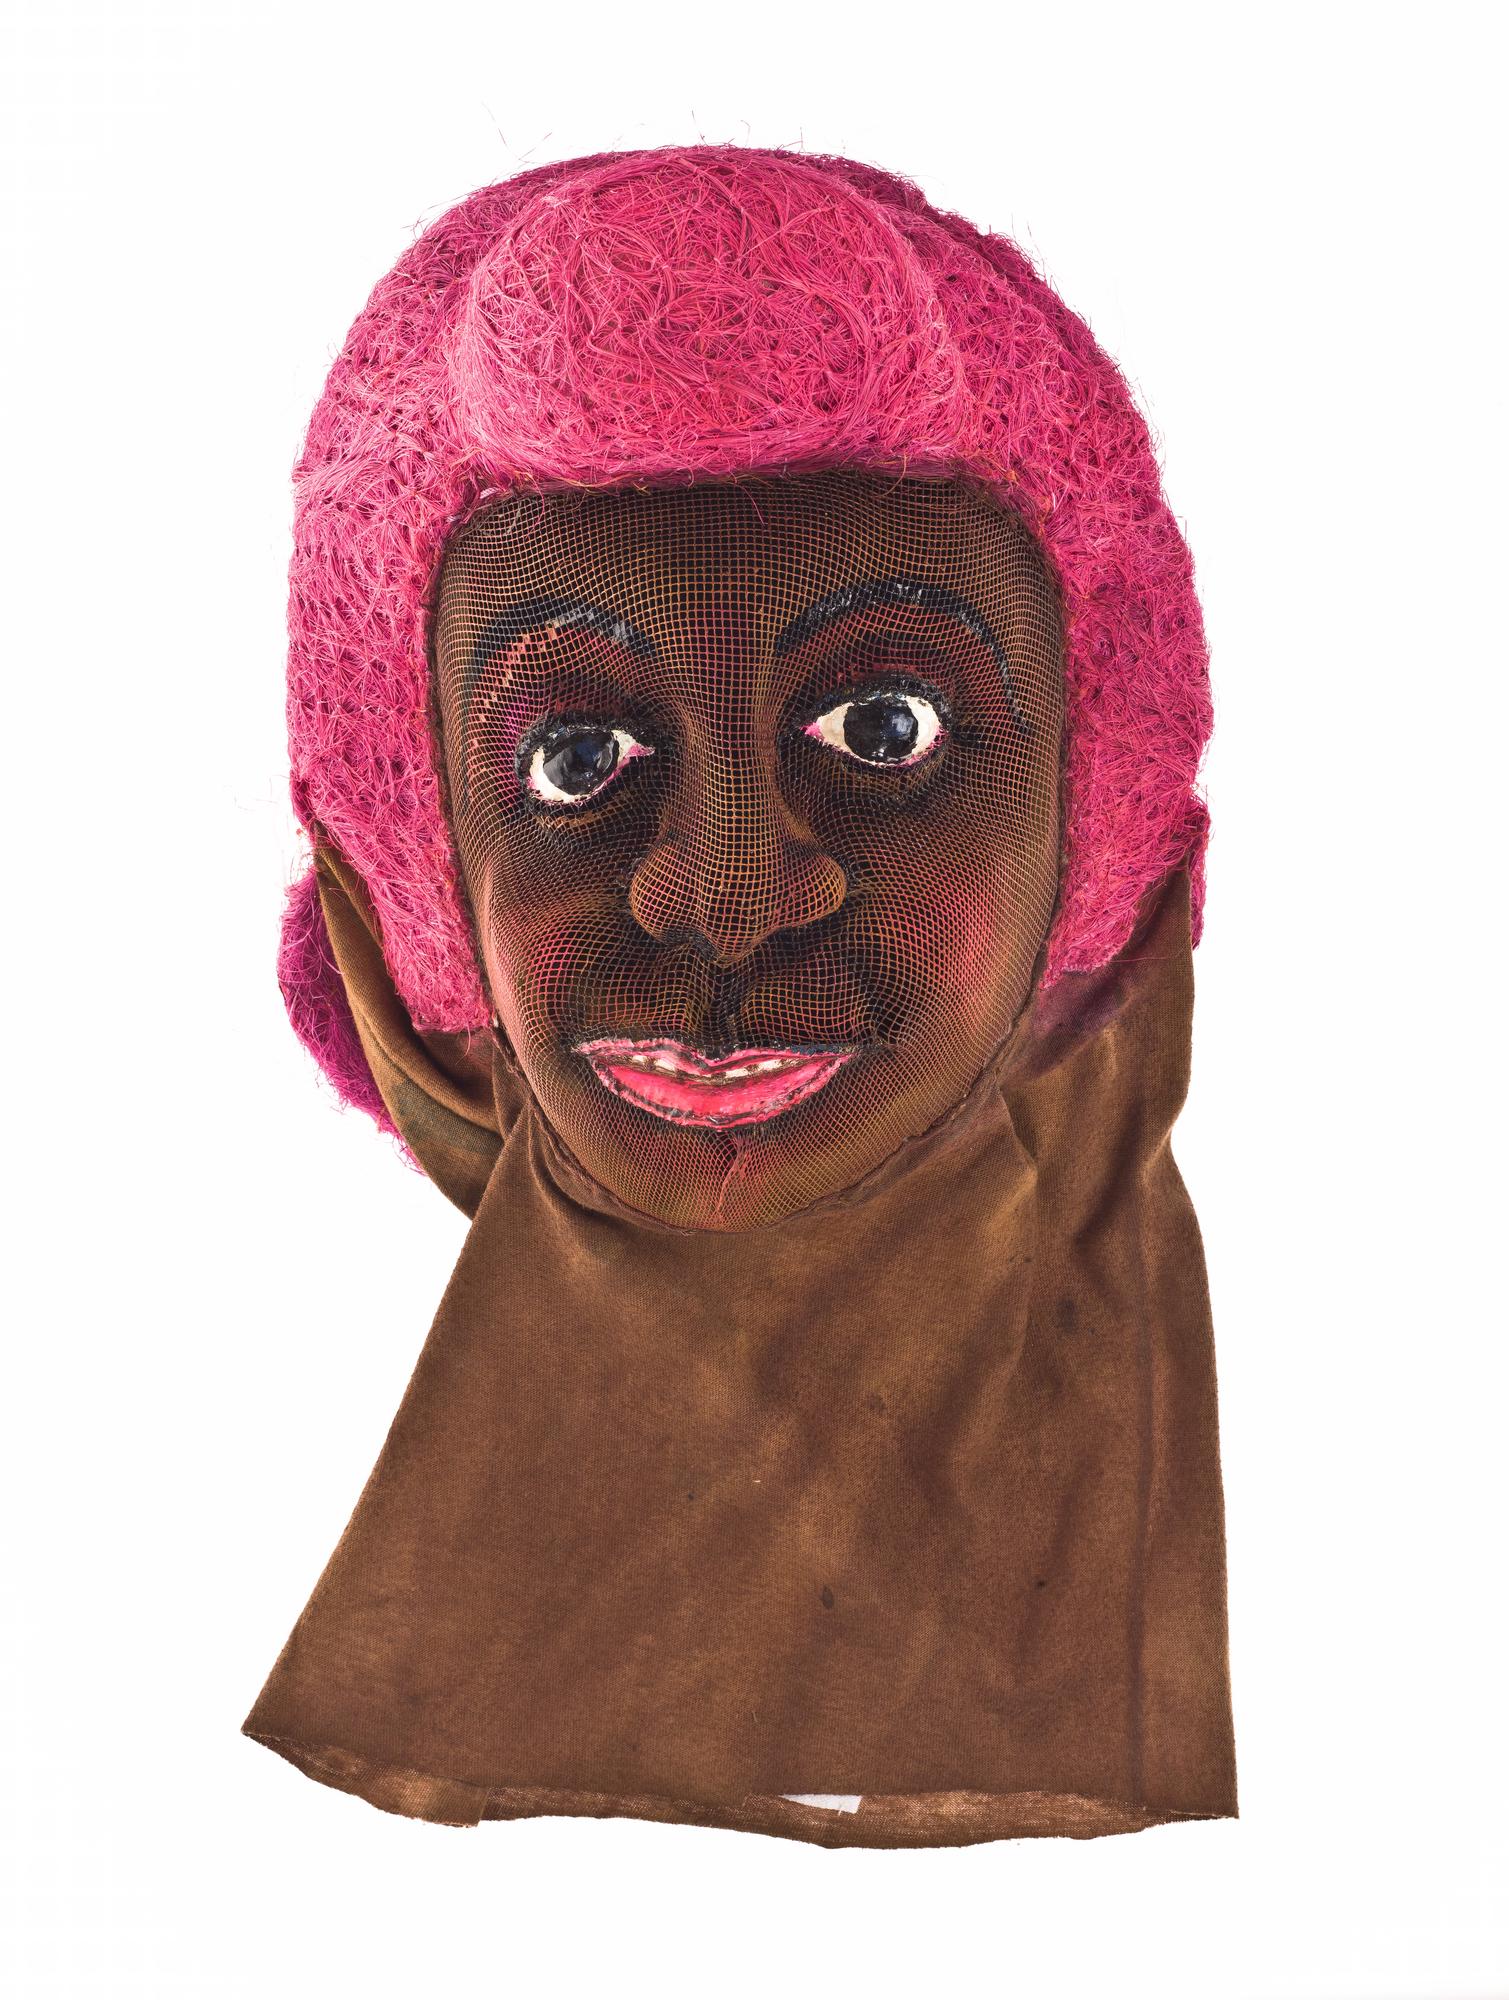 'Fine Lady' face mask with hair of pink dyed sisal and face of painted wire mesh, part of a fancy dress masquerade costume: Africa, West Africa, Ghana, Elmina, by Donatus Archibald Acquandoh (alias Hippies), 2000 